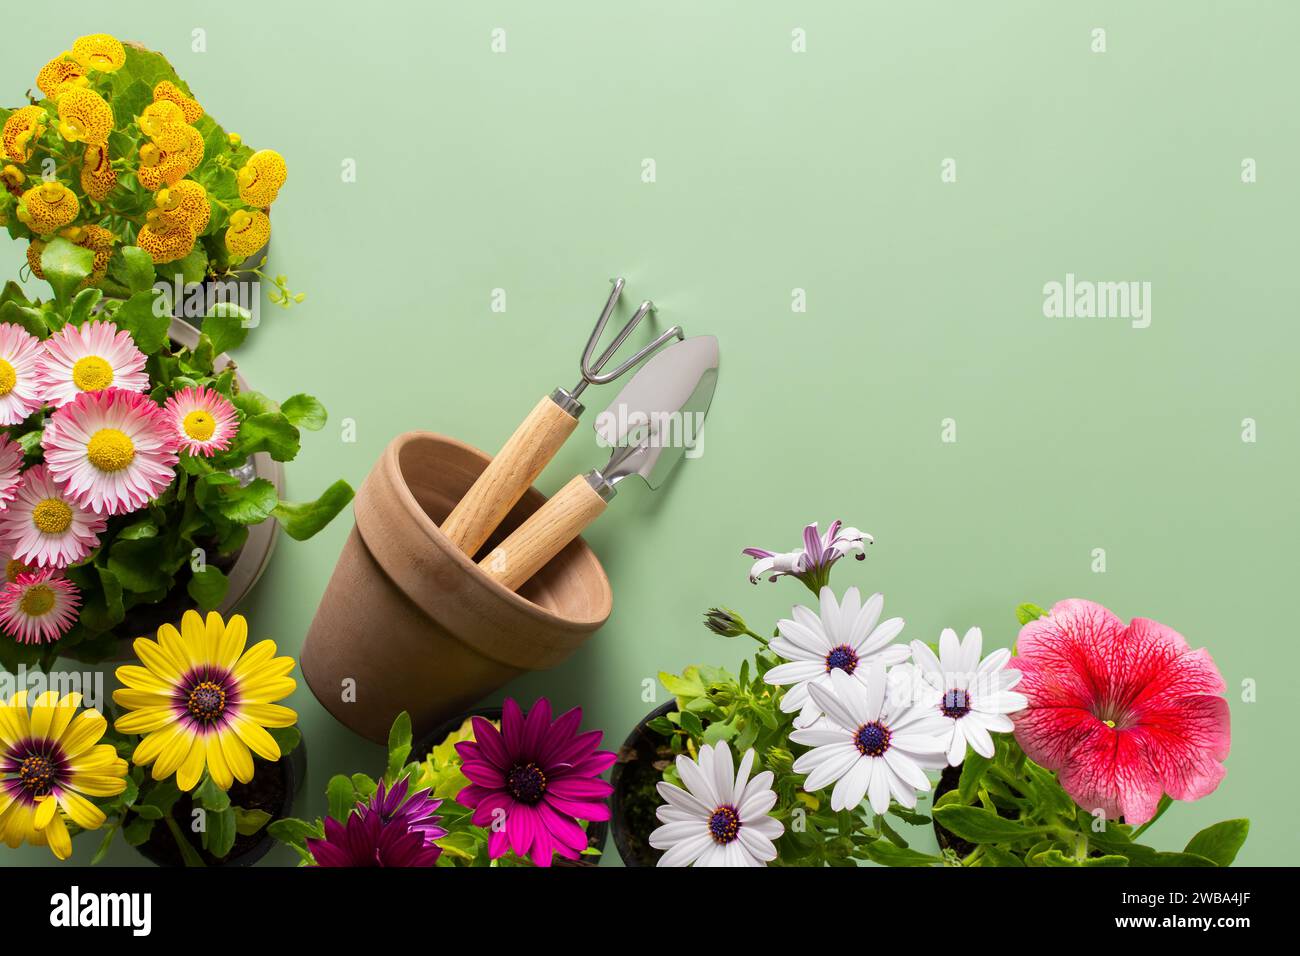 Spring decoration of a home balcony or terrace with flowers, Osteospermum and Calceolaria and Petunia on a green background, home gardening and hobbie Stock Photo